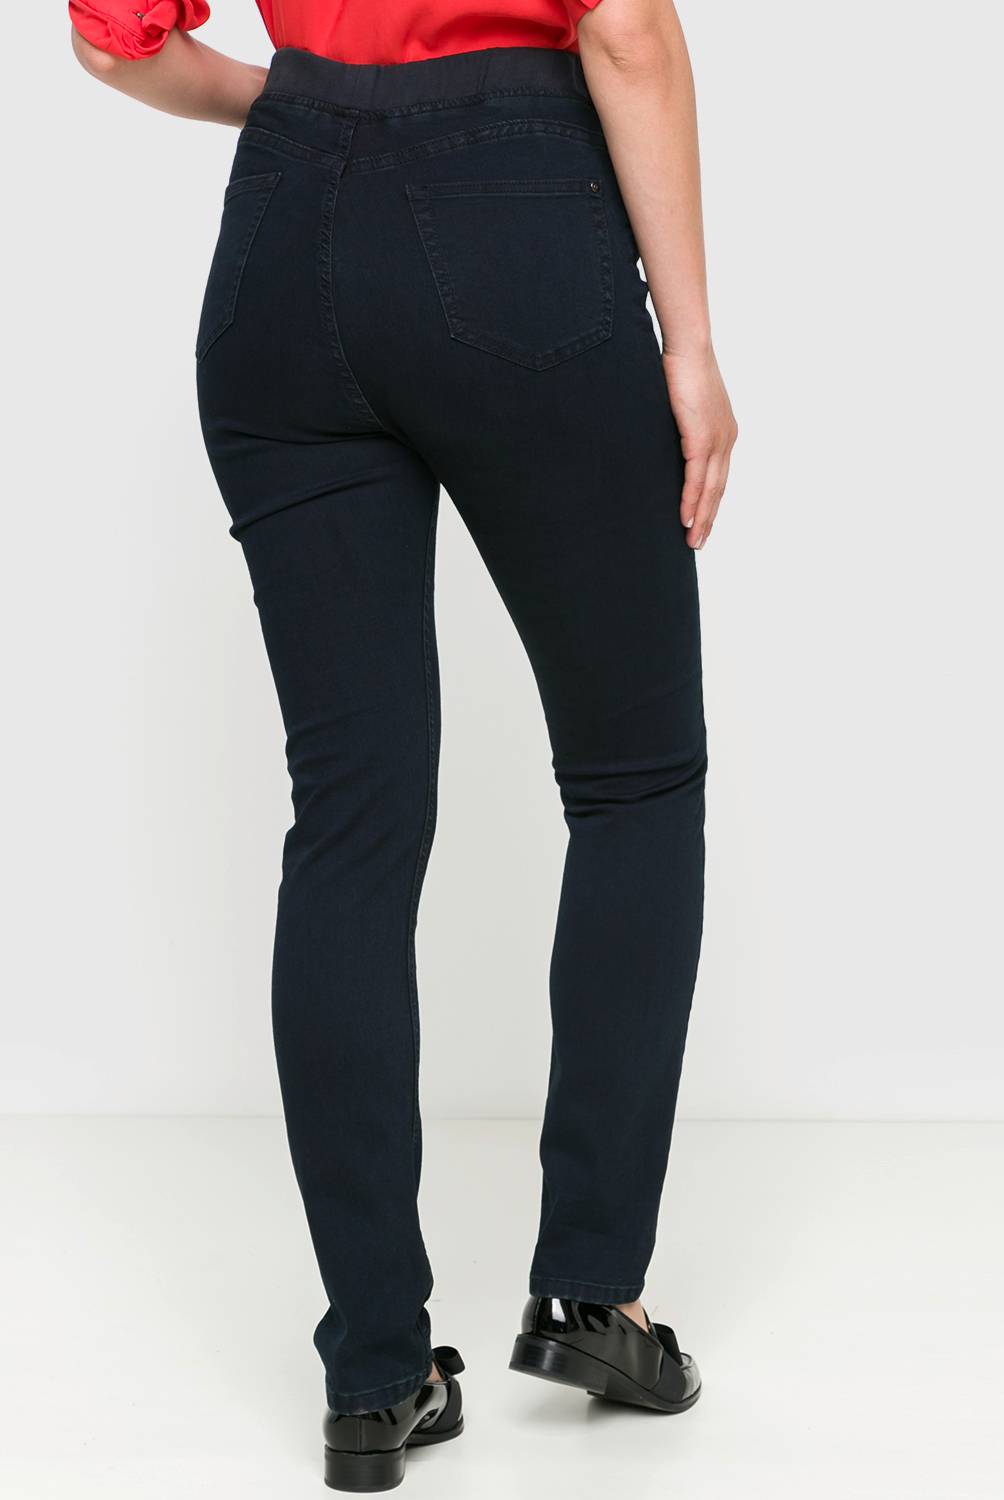 Newport - Jeans Mujer